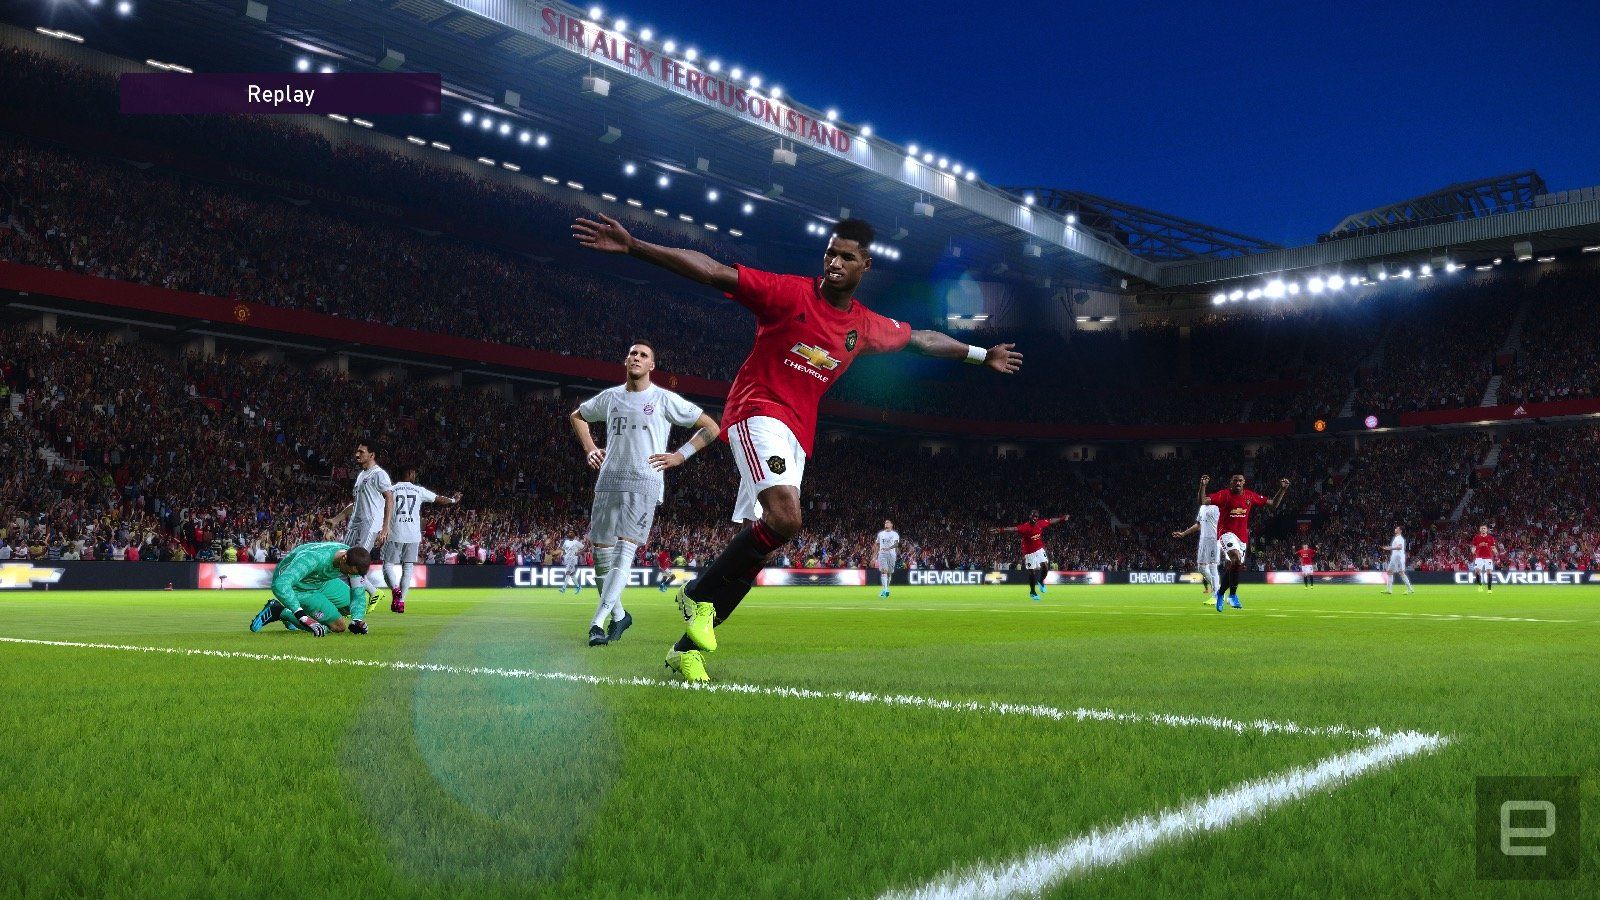 PES 2020' isn't perfect, but it's good enough to rival 'FIFA 20'